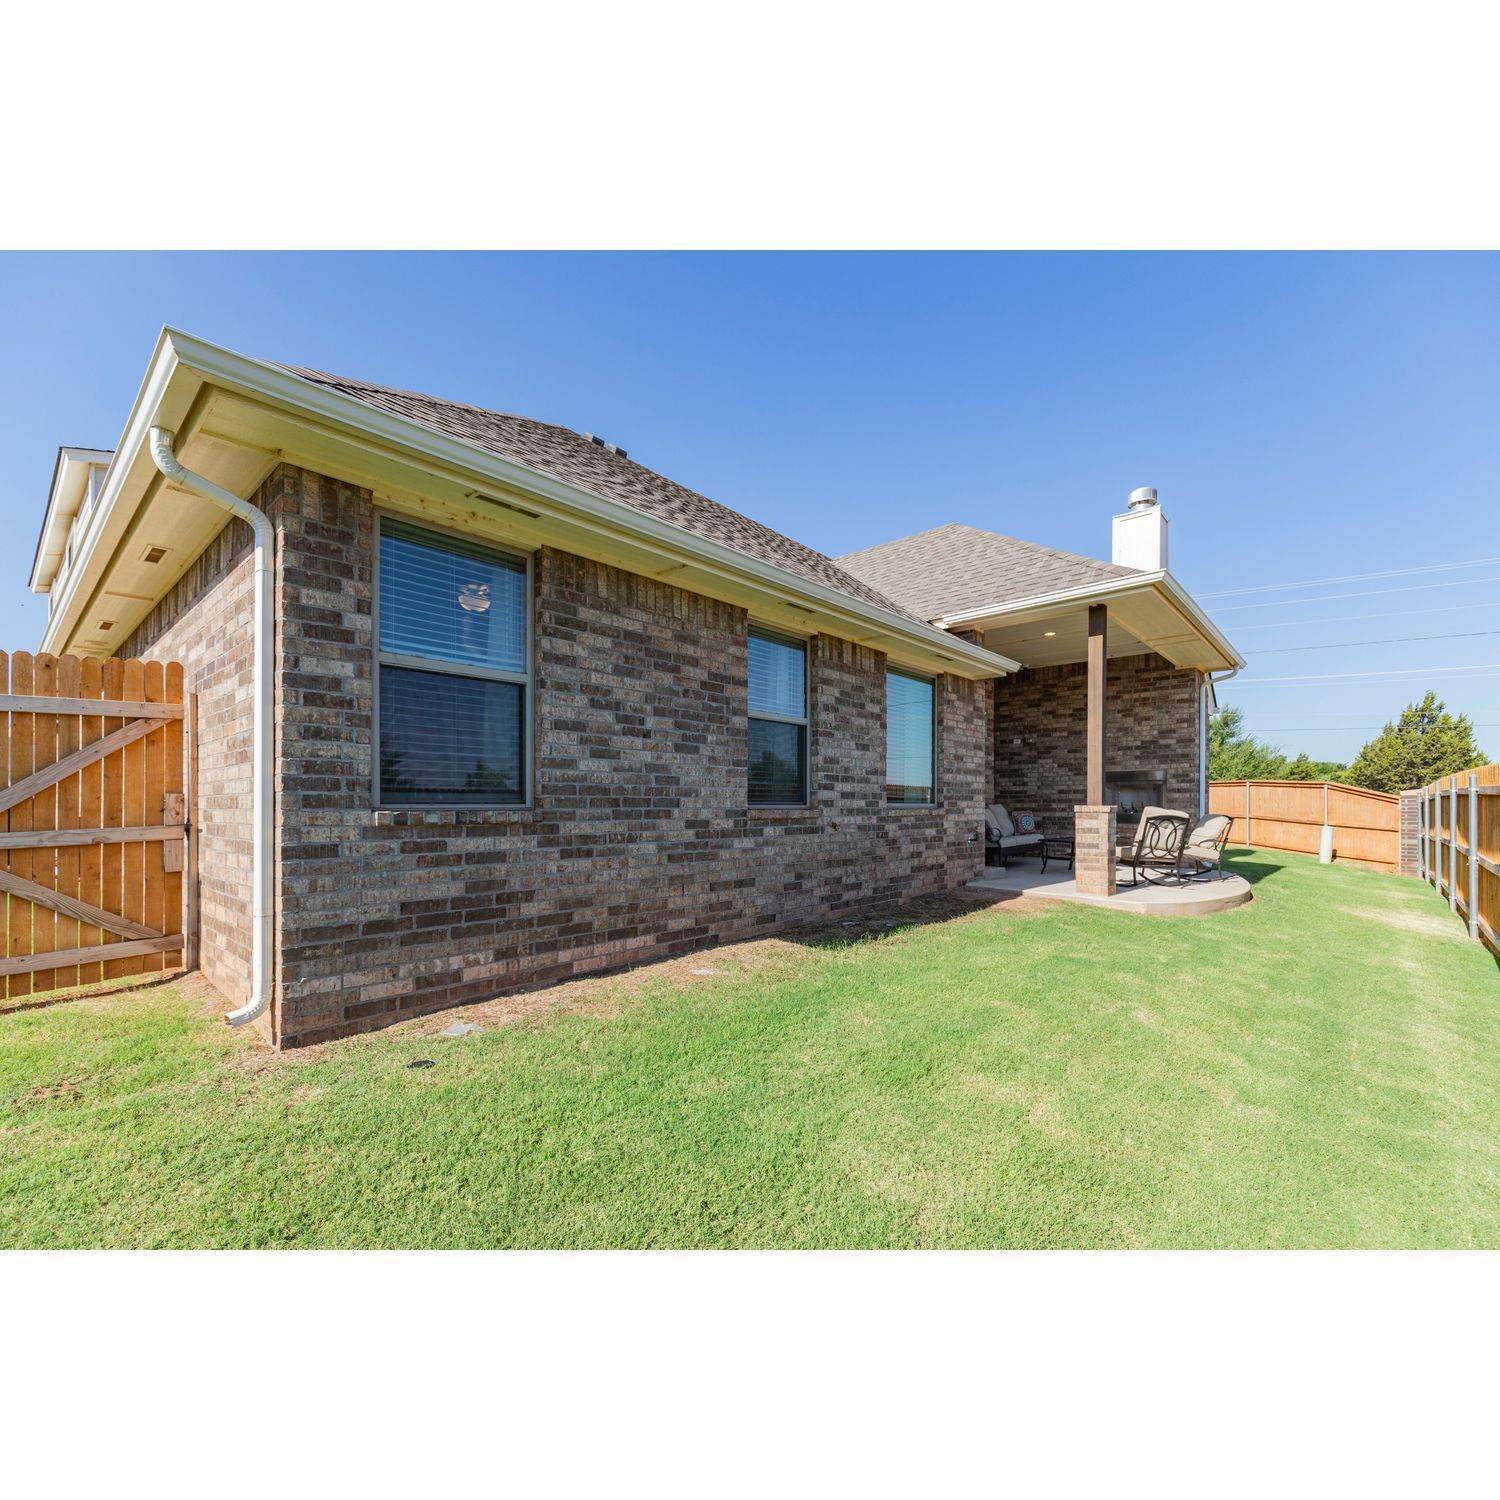 44. Canyons bâtiment à 10533 SW 52nd St, Mustang, OK 73064